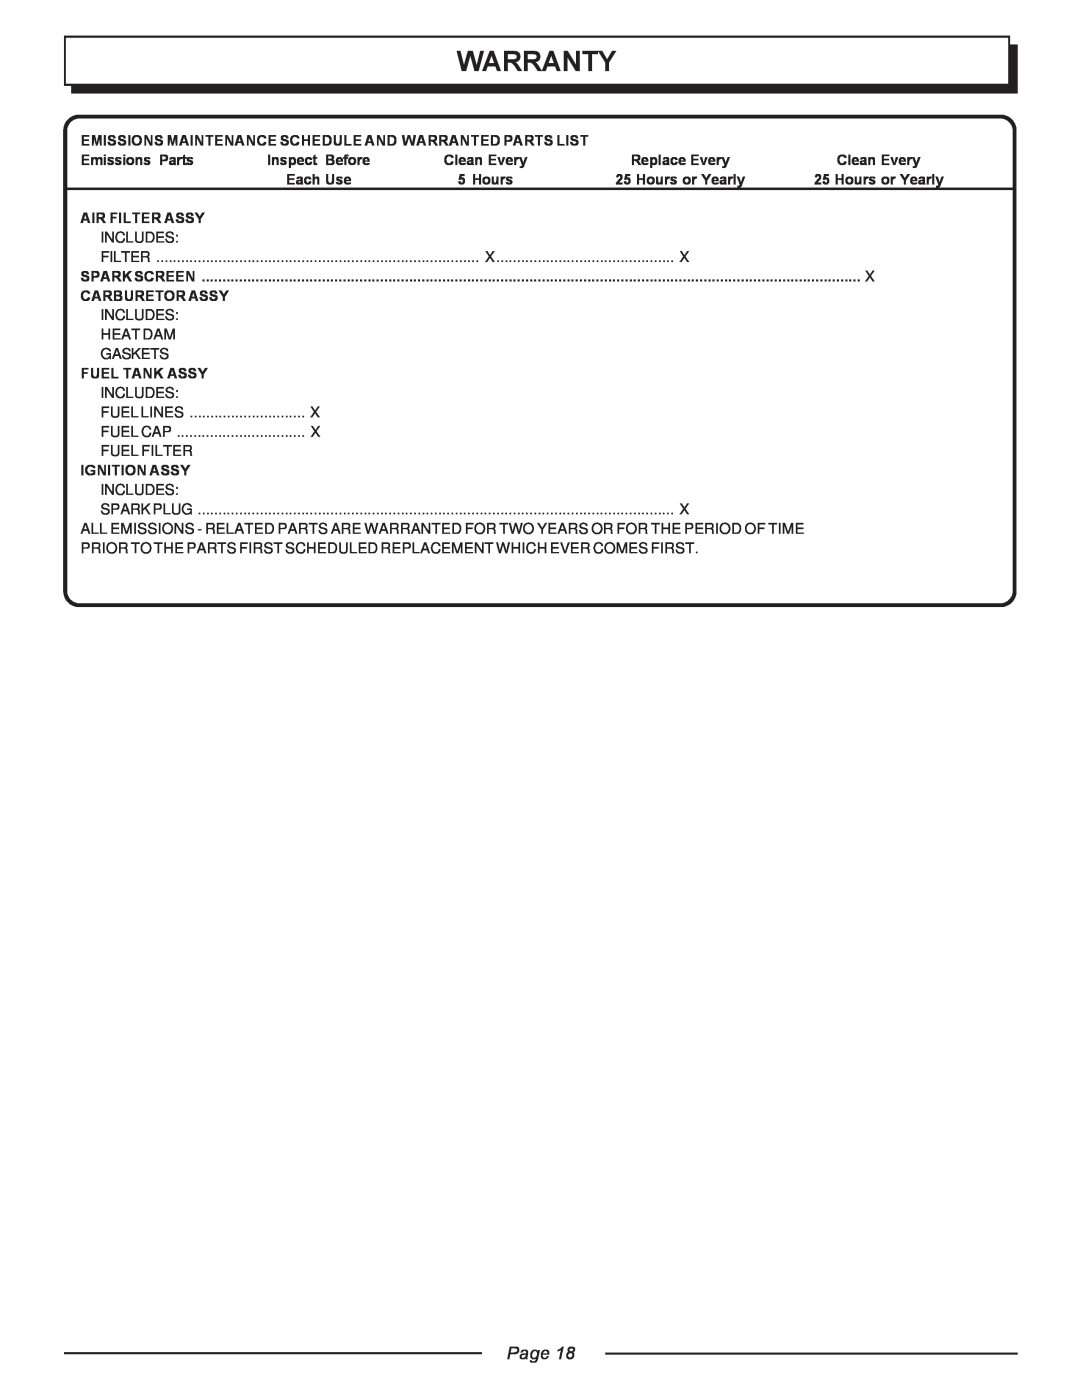 Homelite UT20818 Warranty, Page, Emissions Maintenance Schedule And Warranted Parts List, Emissions Parts, Each Use, Hours 